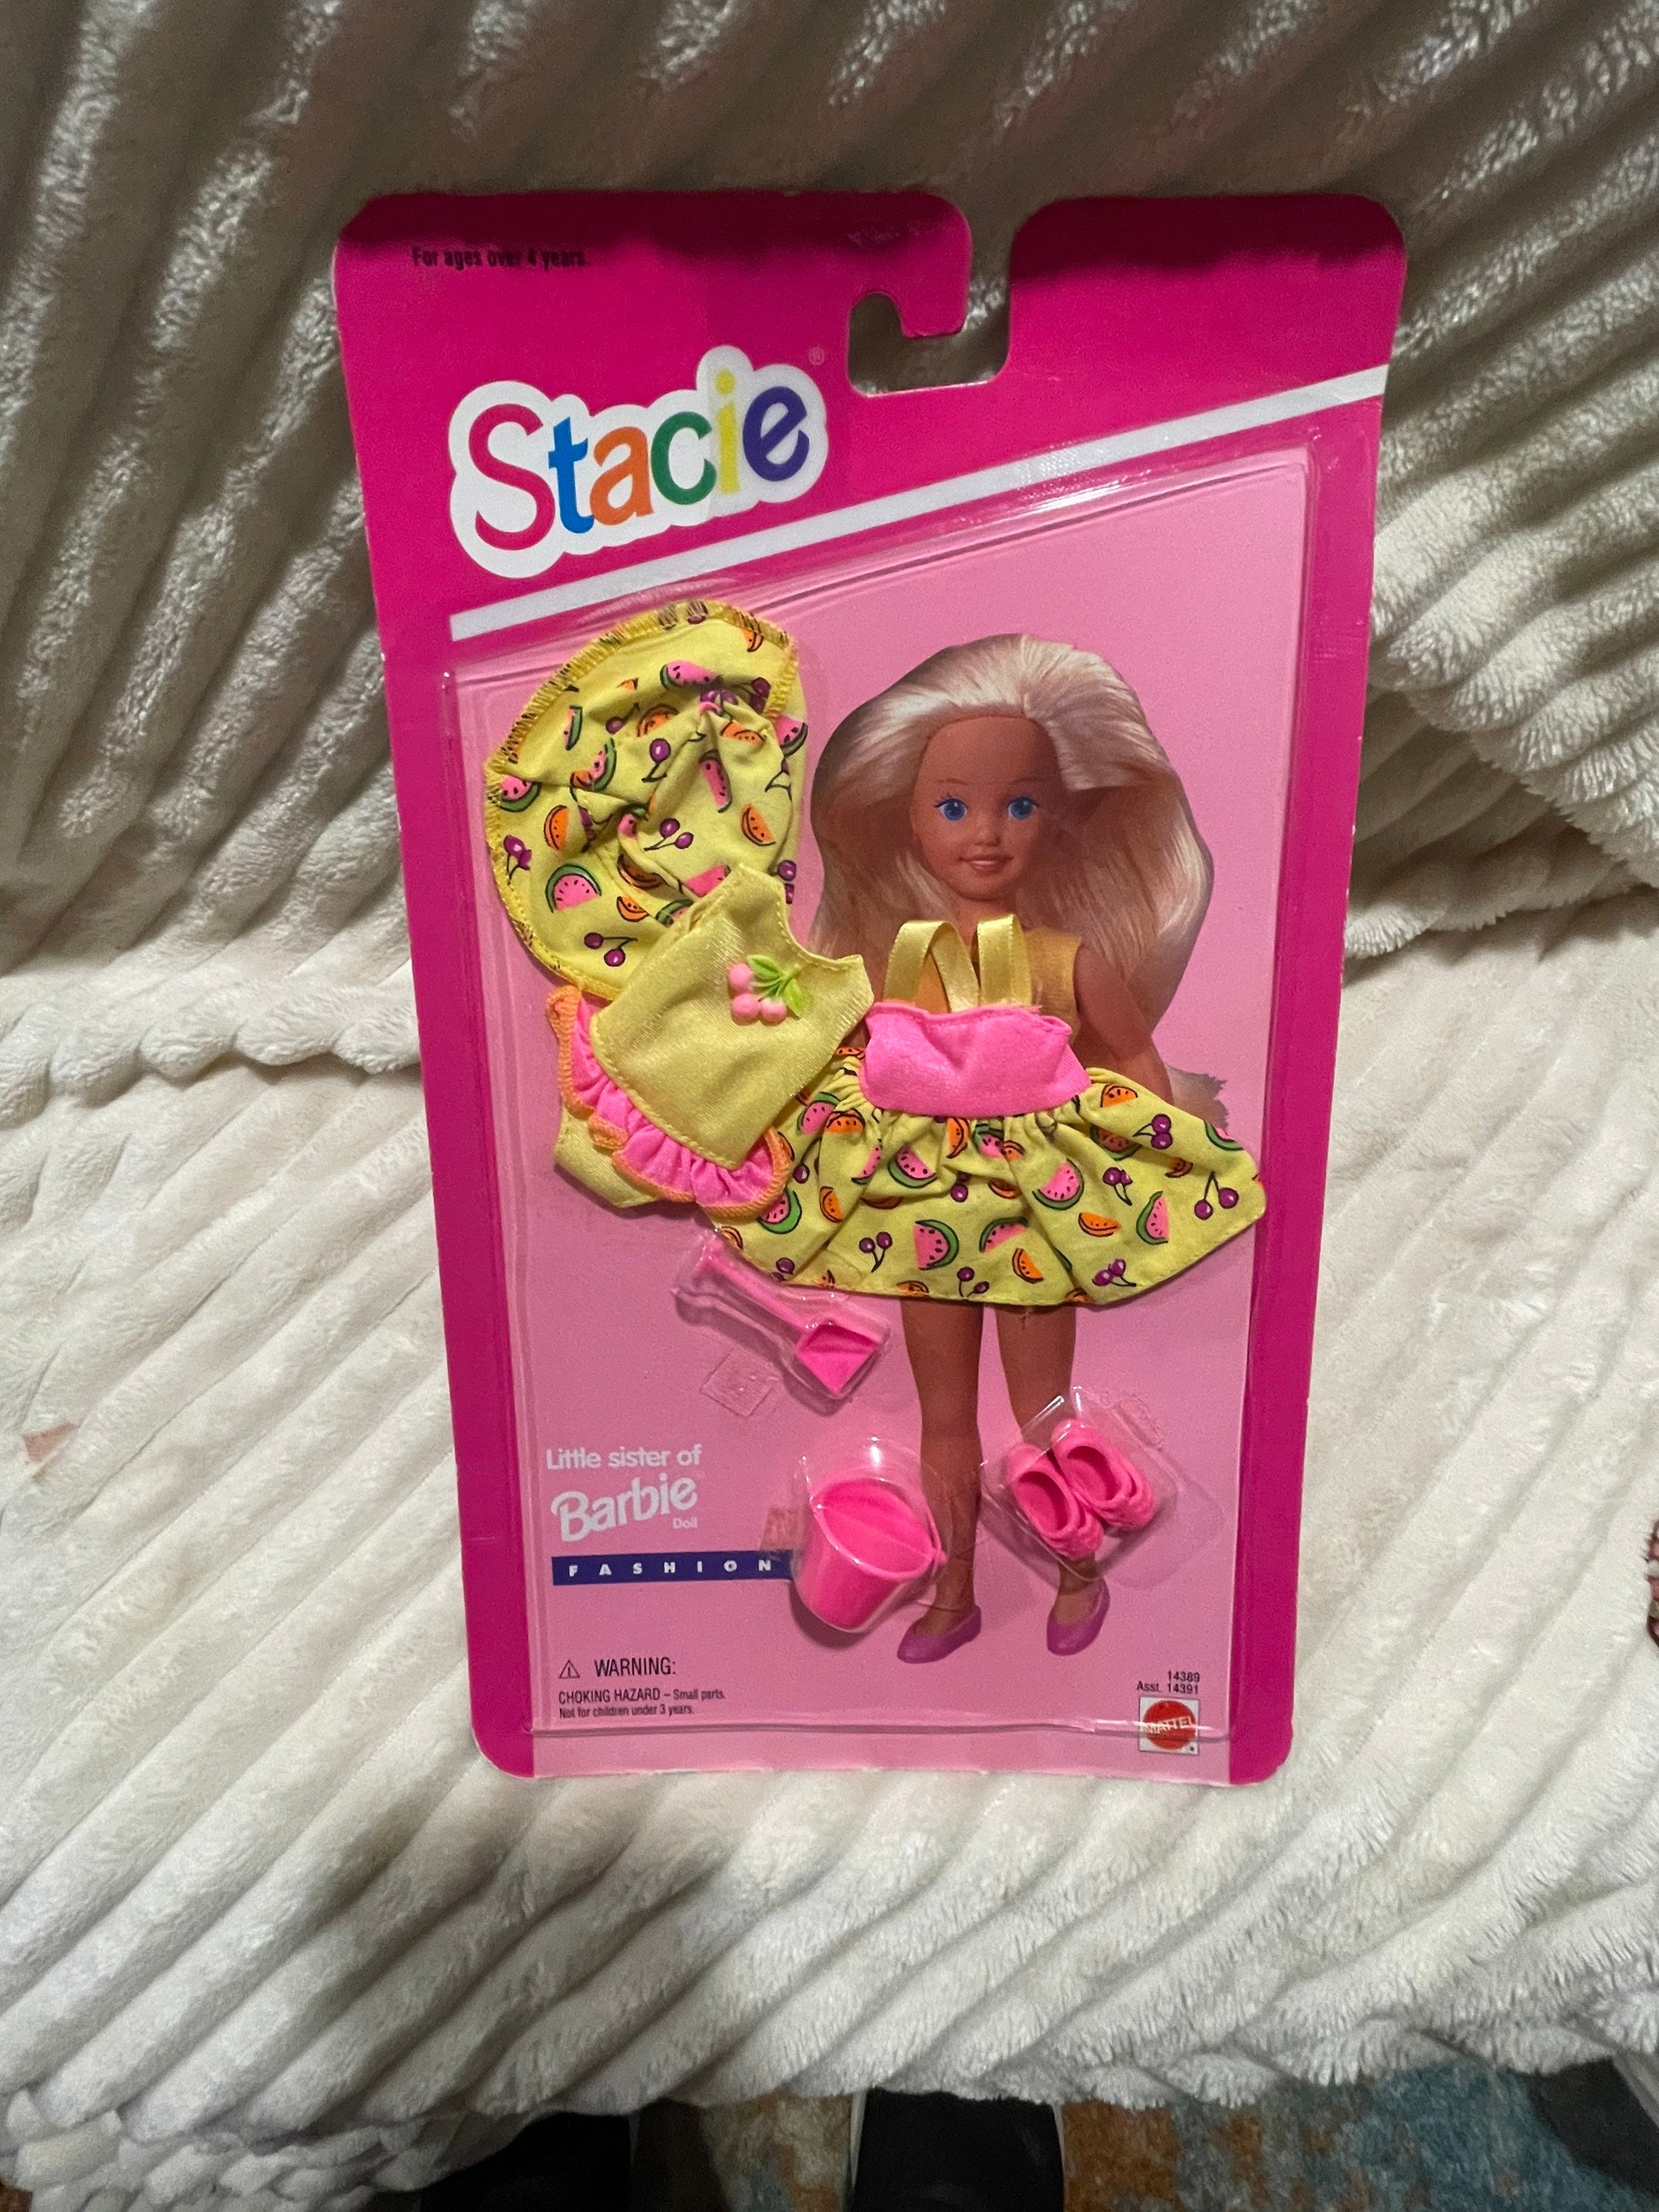  Stacie Doll, Littlest Sister of Barbie Doll (1991) : Toys &  Games